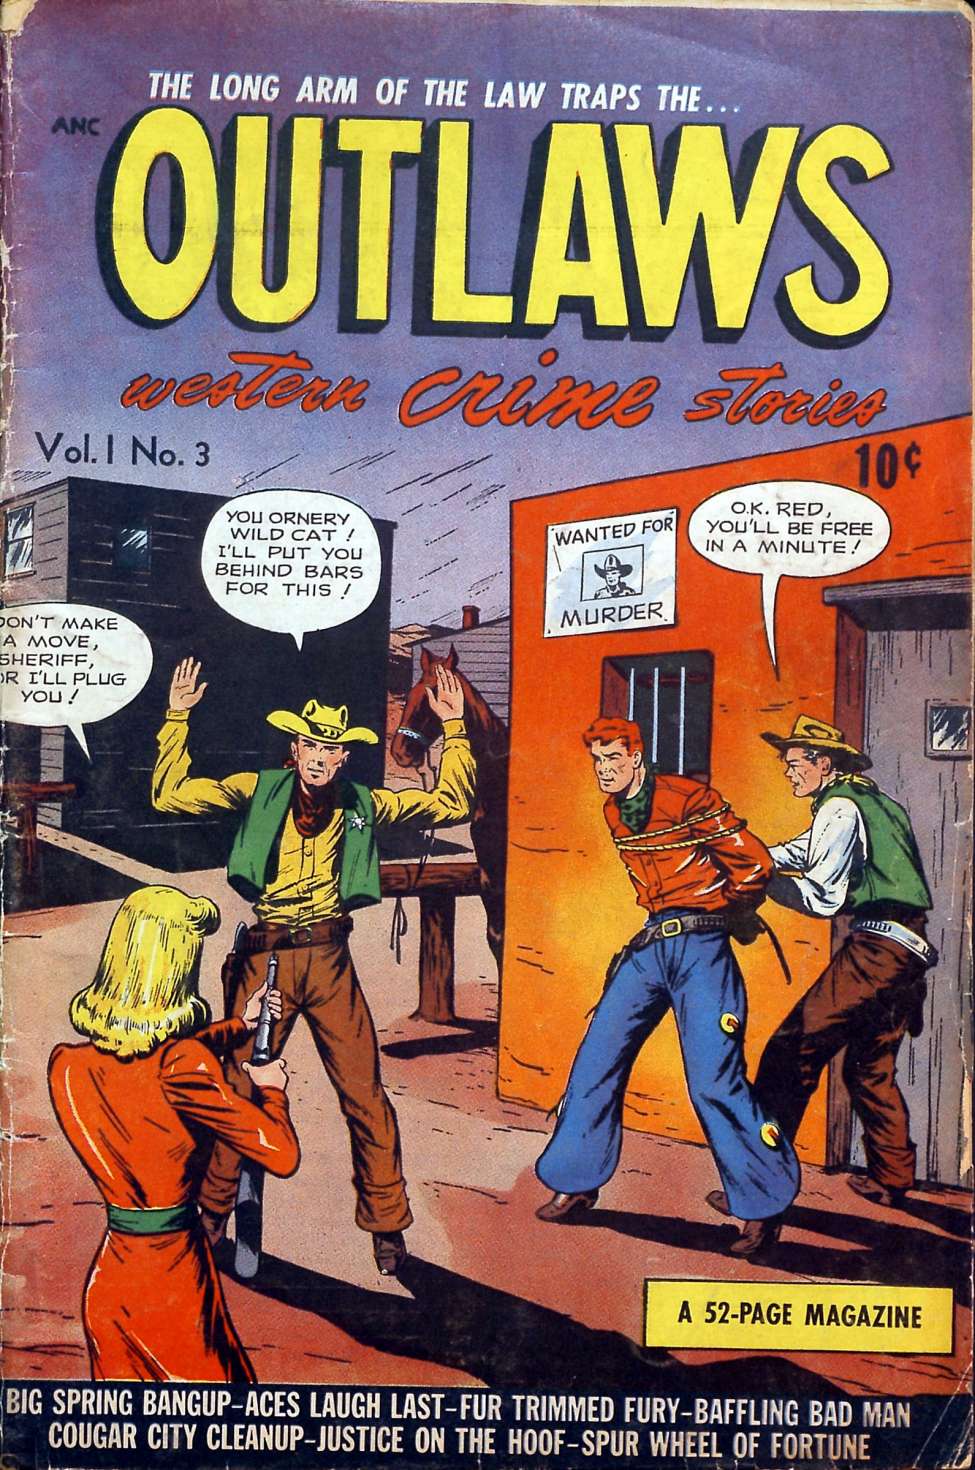 Book Cover For Outlaws 3